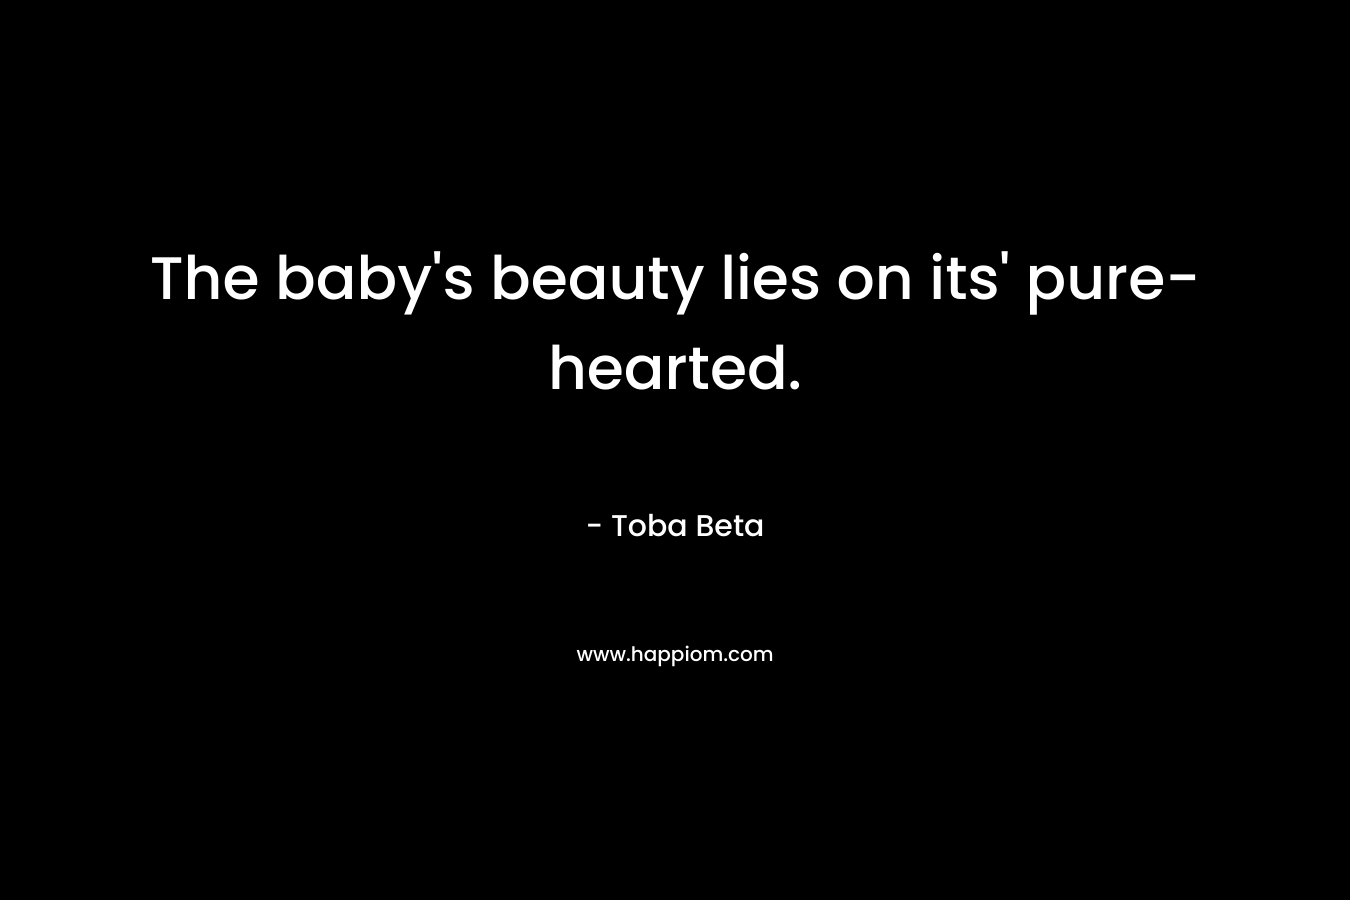 The baby's beauty lies on its' pure-hearted.